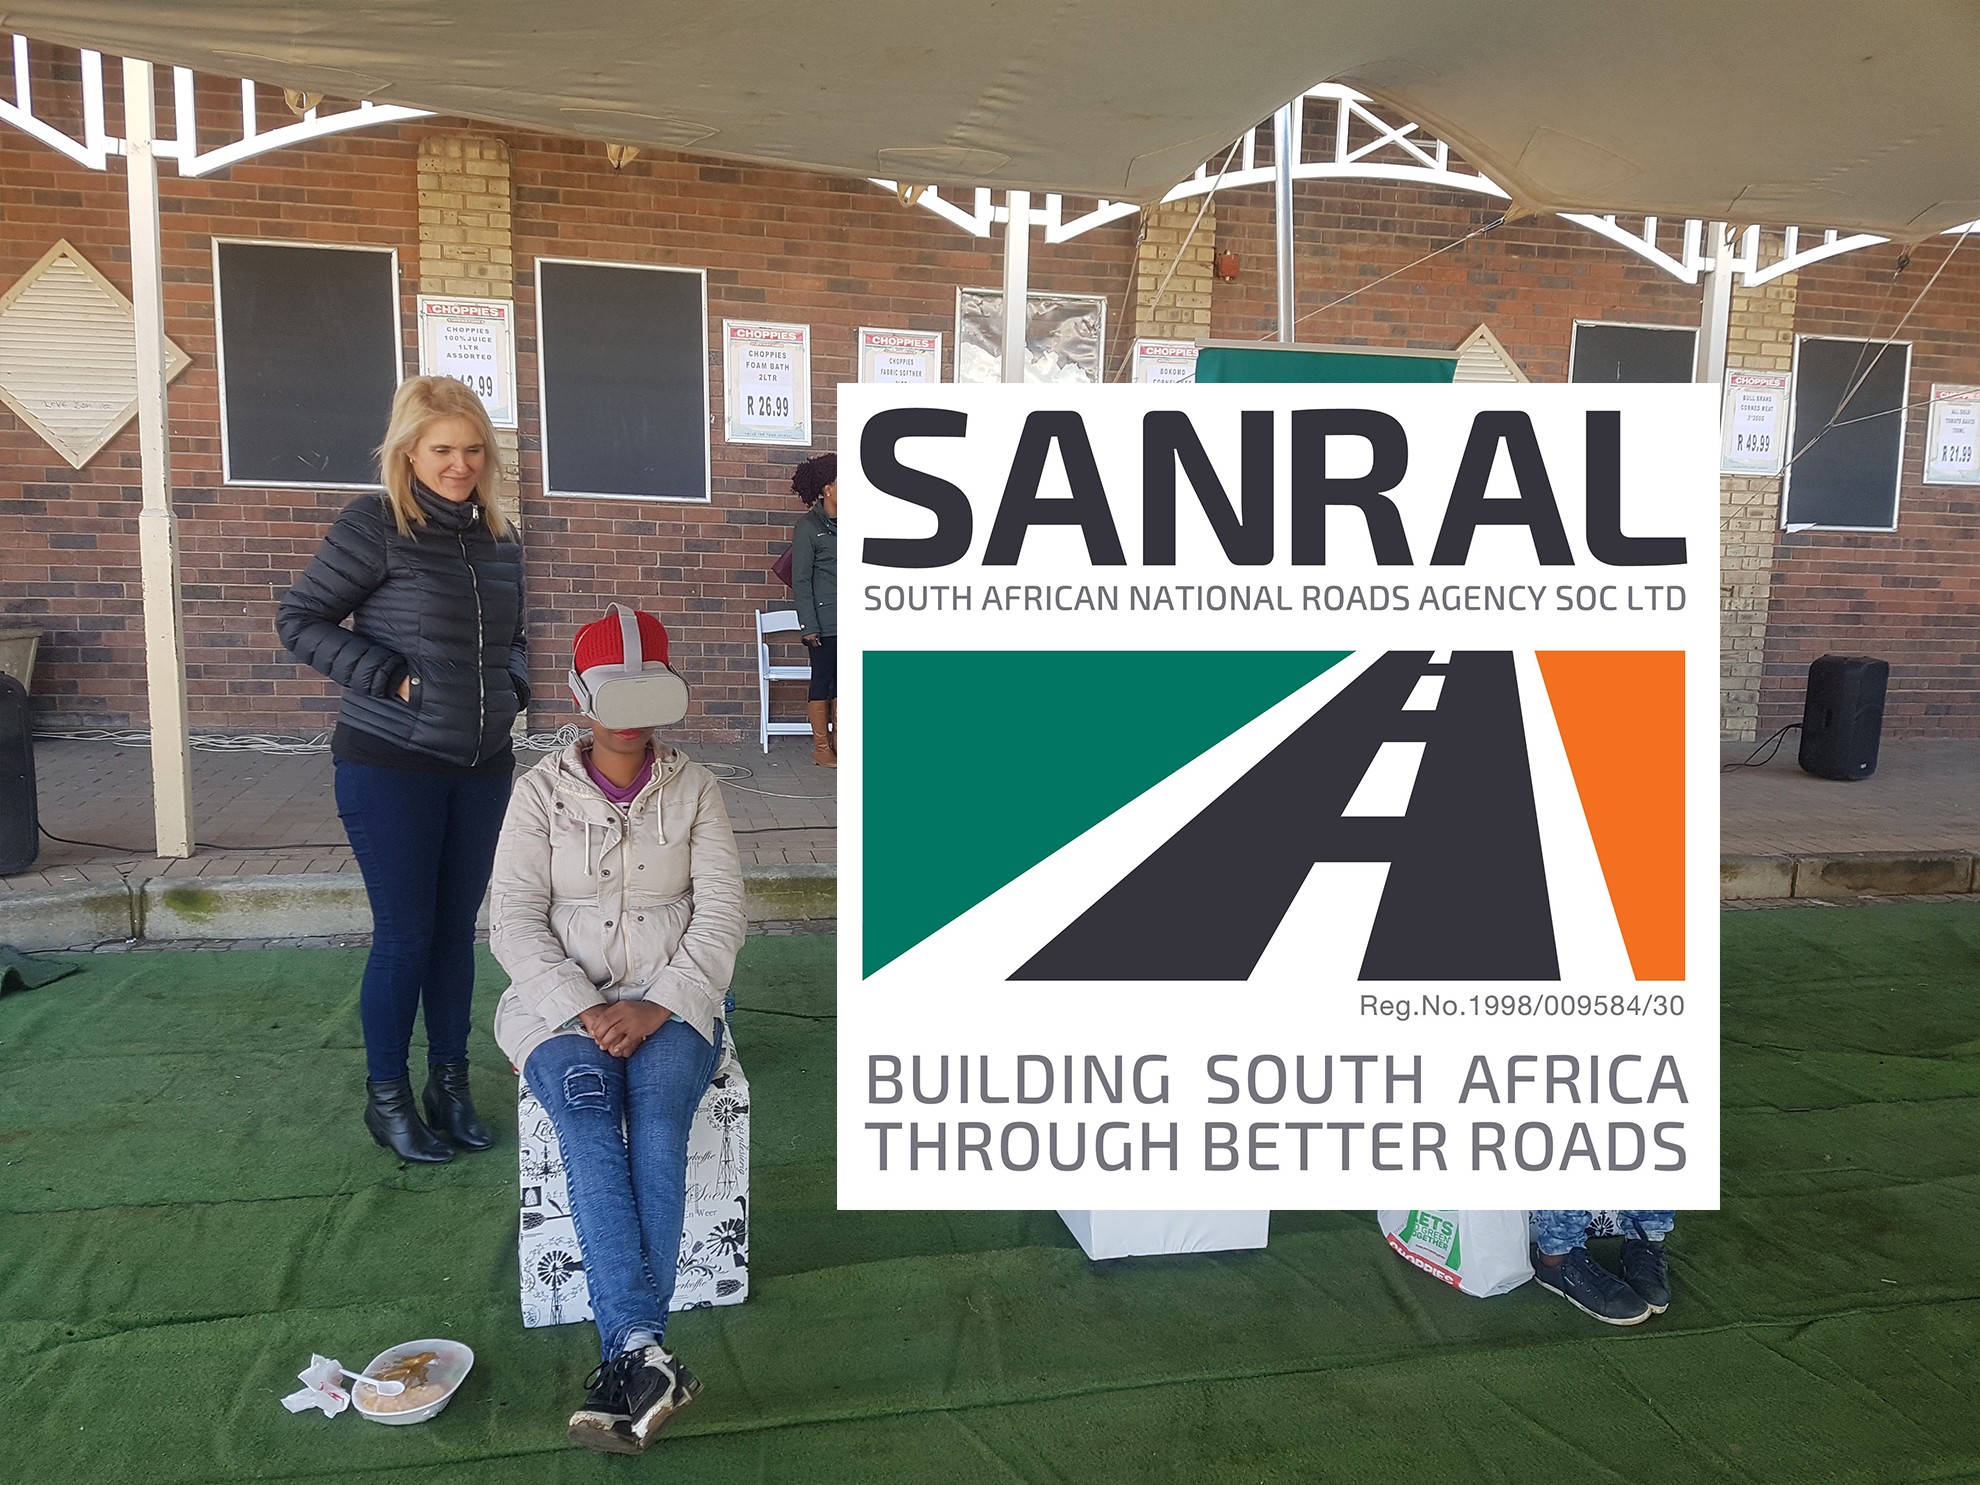 Sanral – South African Road Agency Virtual Reality Activation